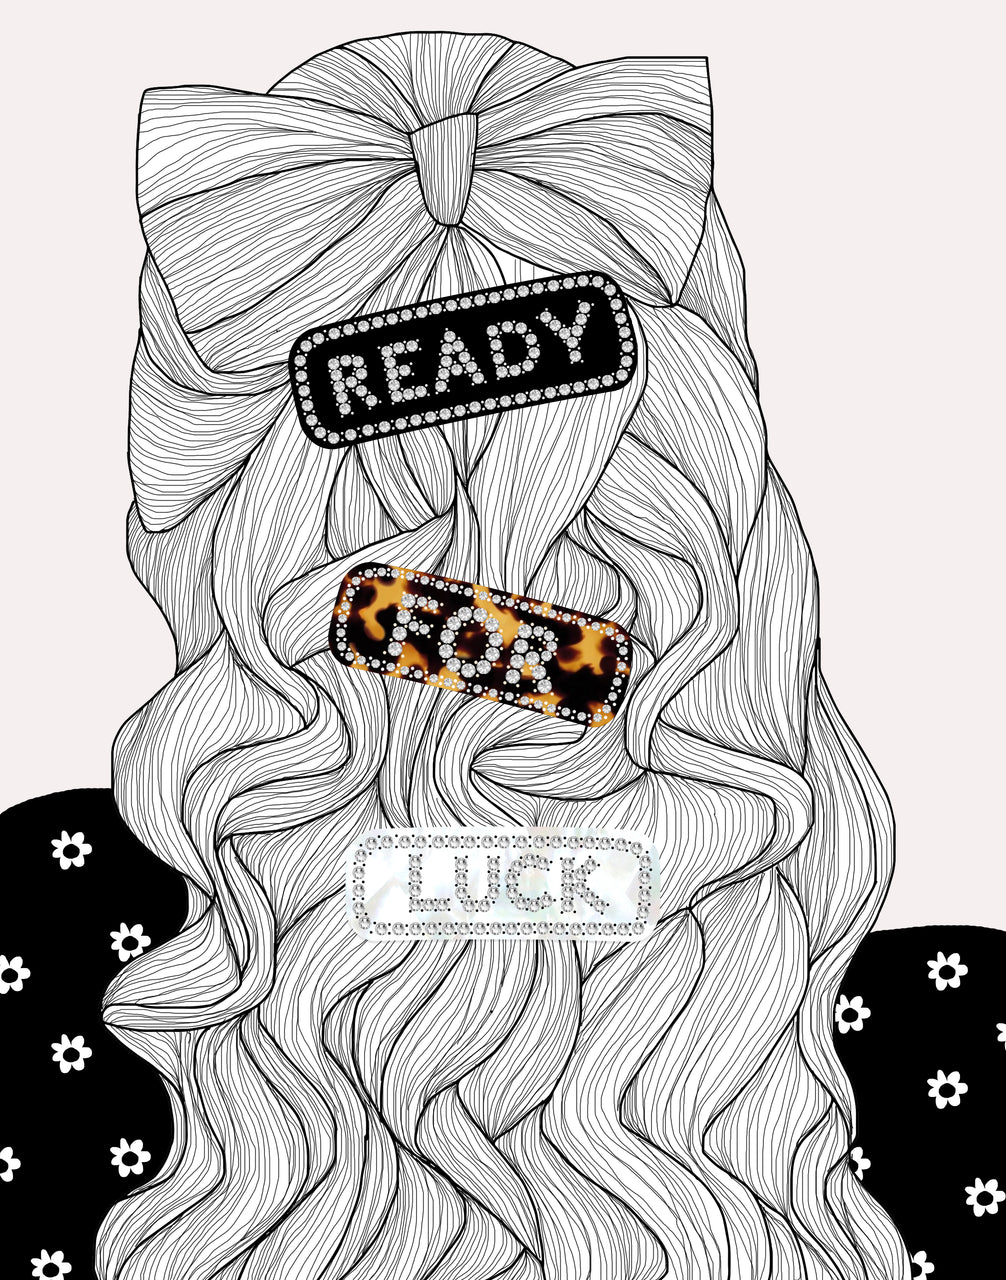 Read for Luck (PRINT)